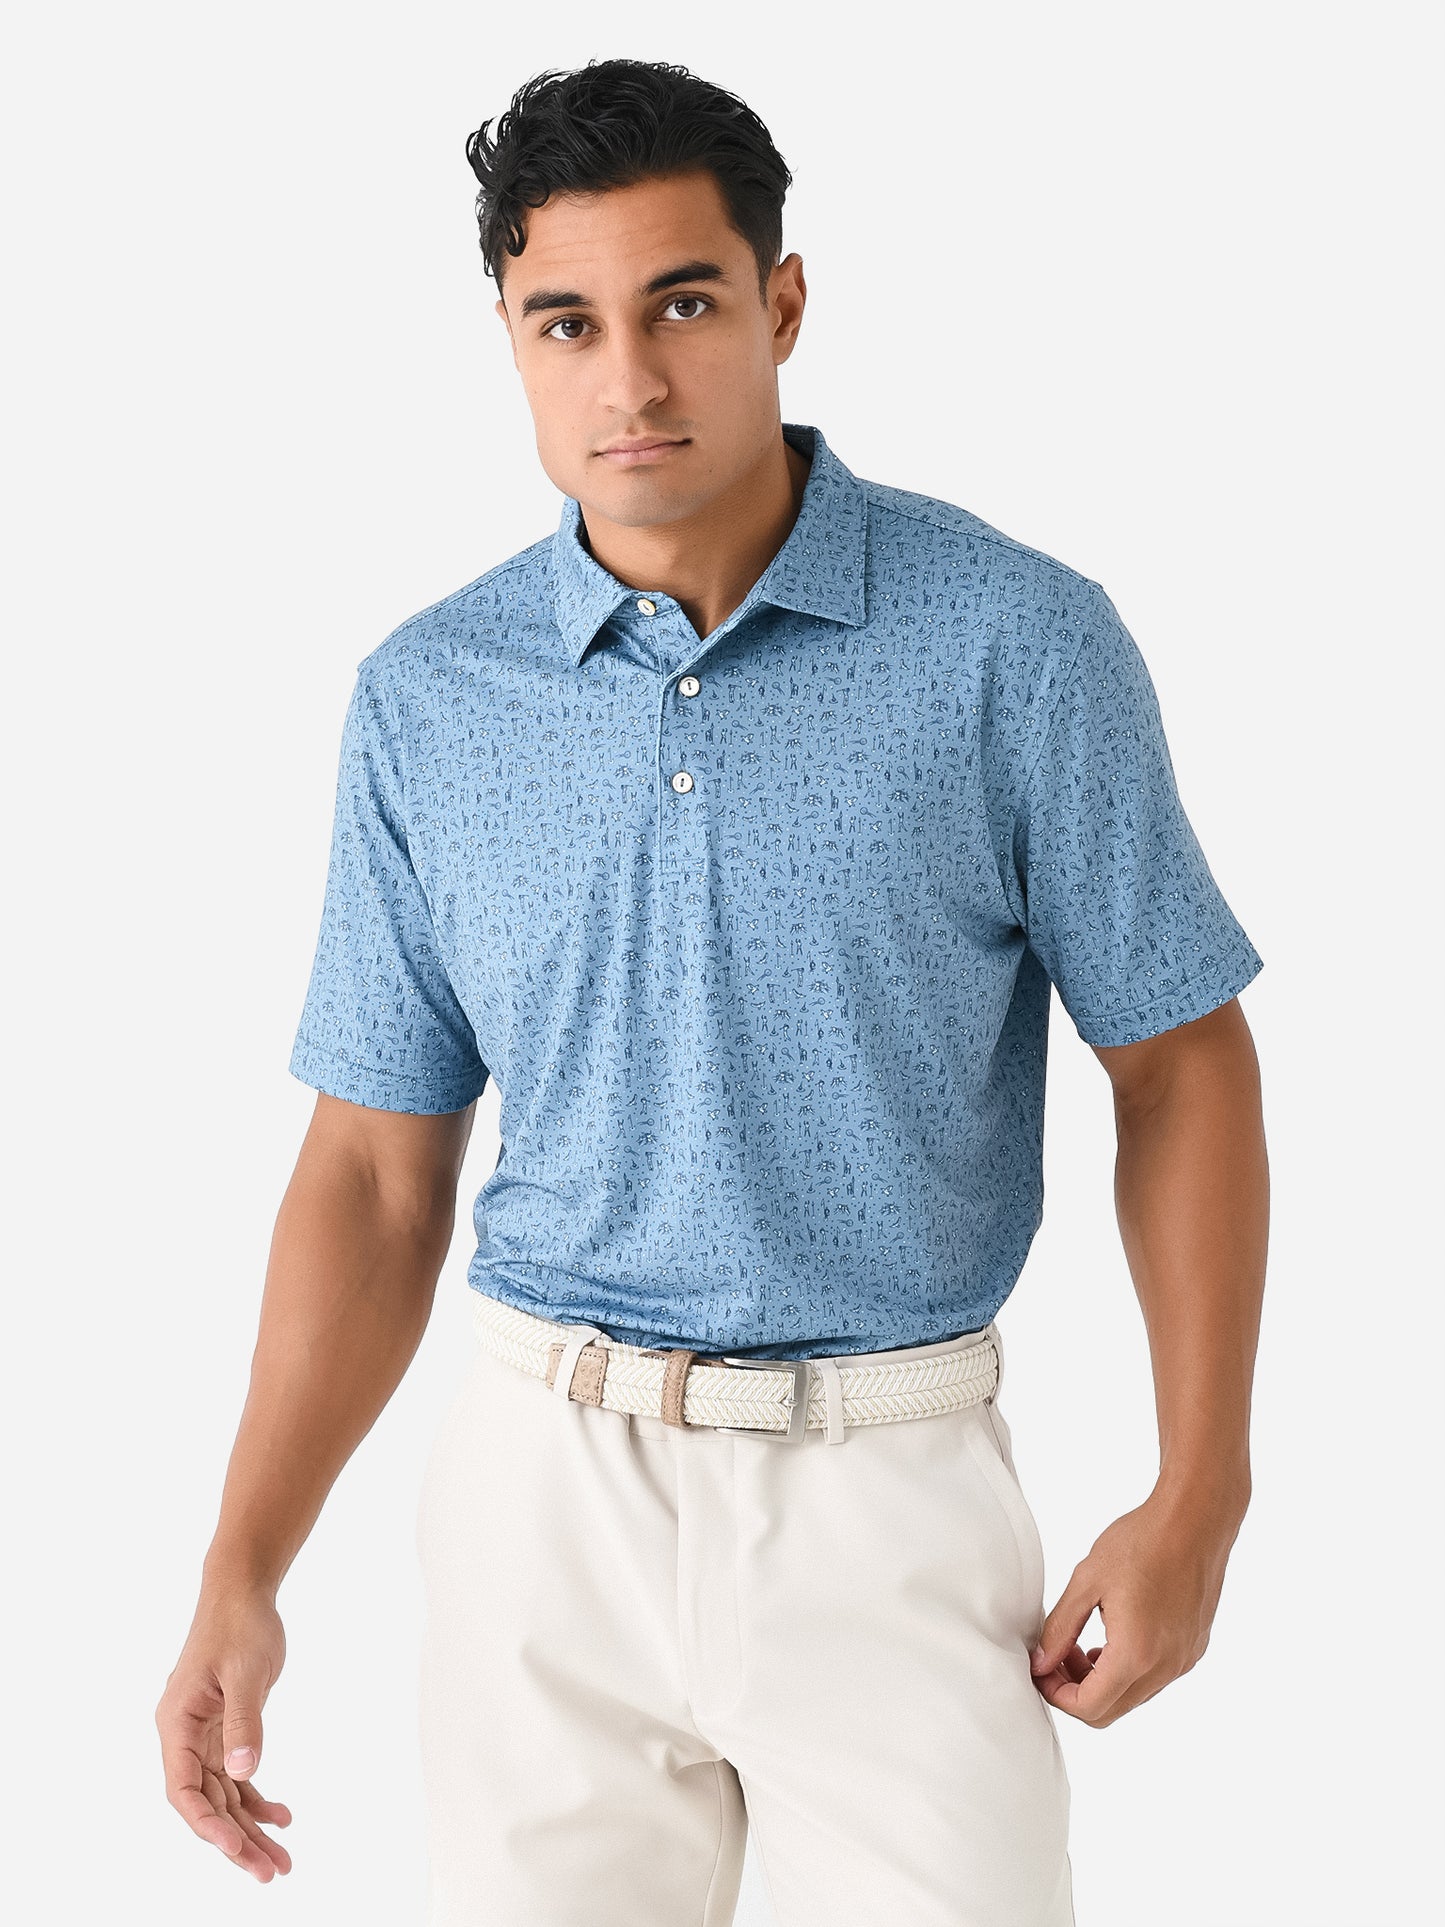 Peter Millar Crown Sport Men's Hole In One Performance Jersey Polo